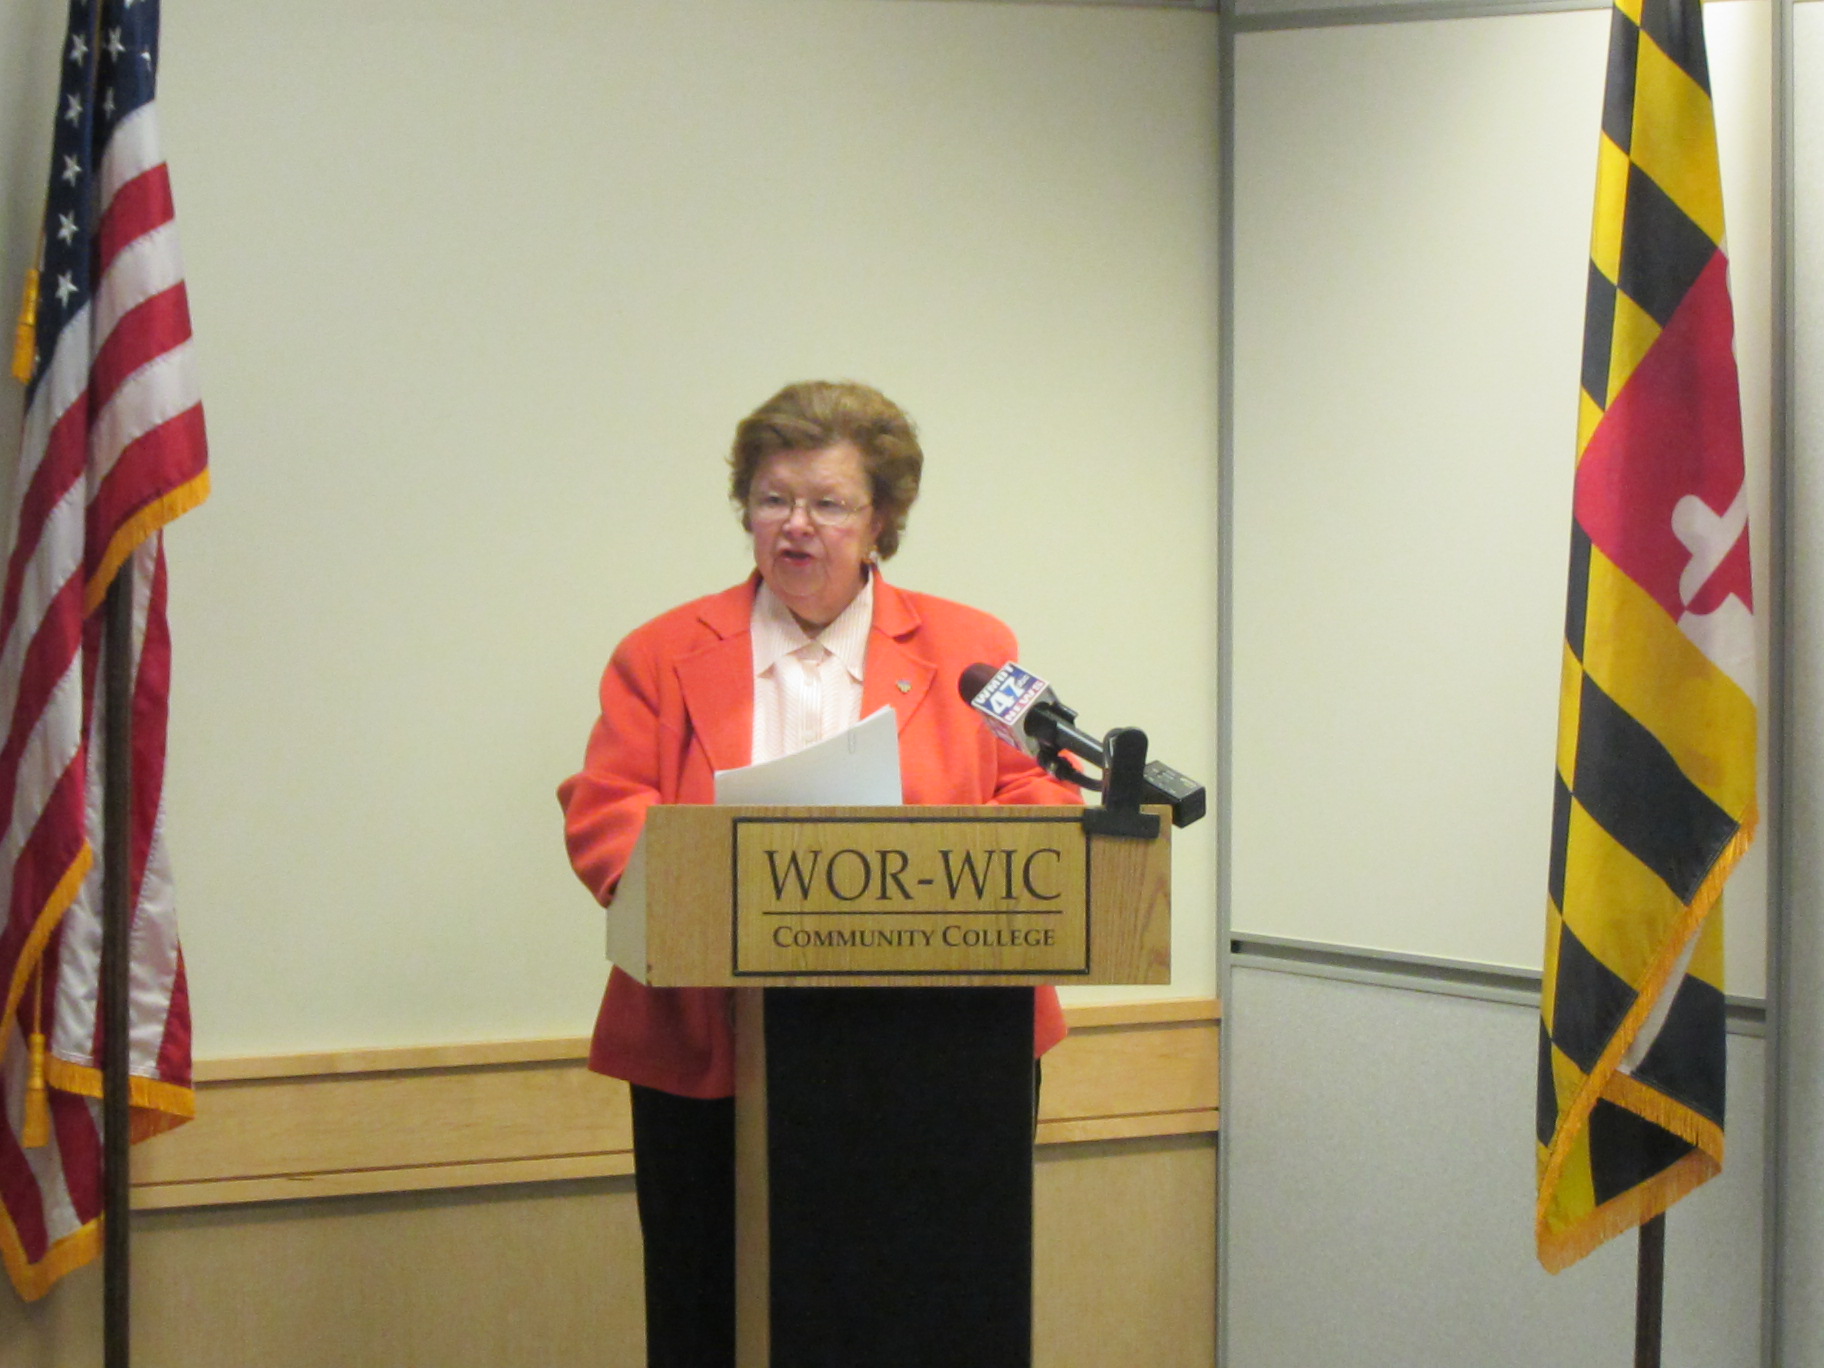 Mikulski Announces Advances in One Maryland Broadband Network at Wor-Wic Community College